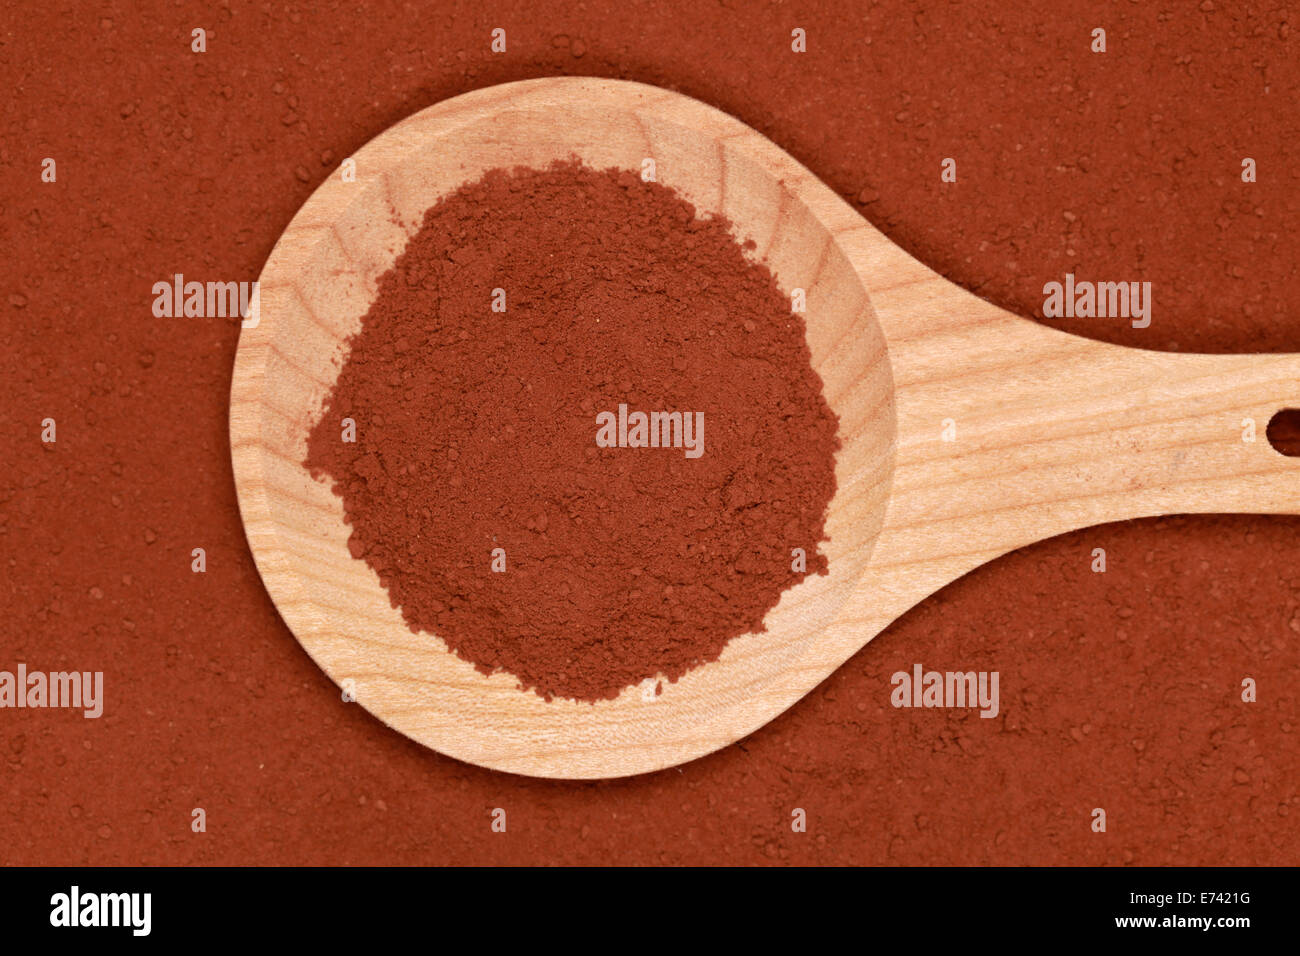 Cocoa powder on a wooden spoon forming a background Stock Photo